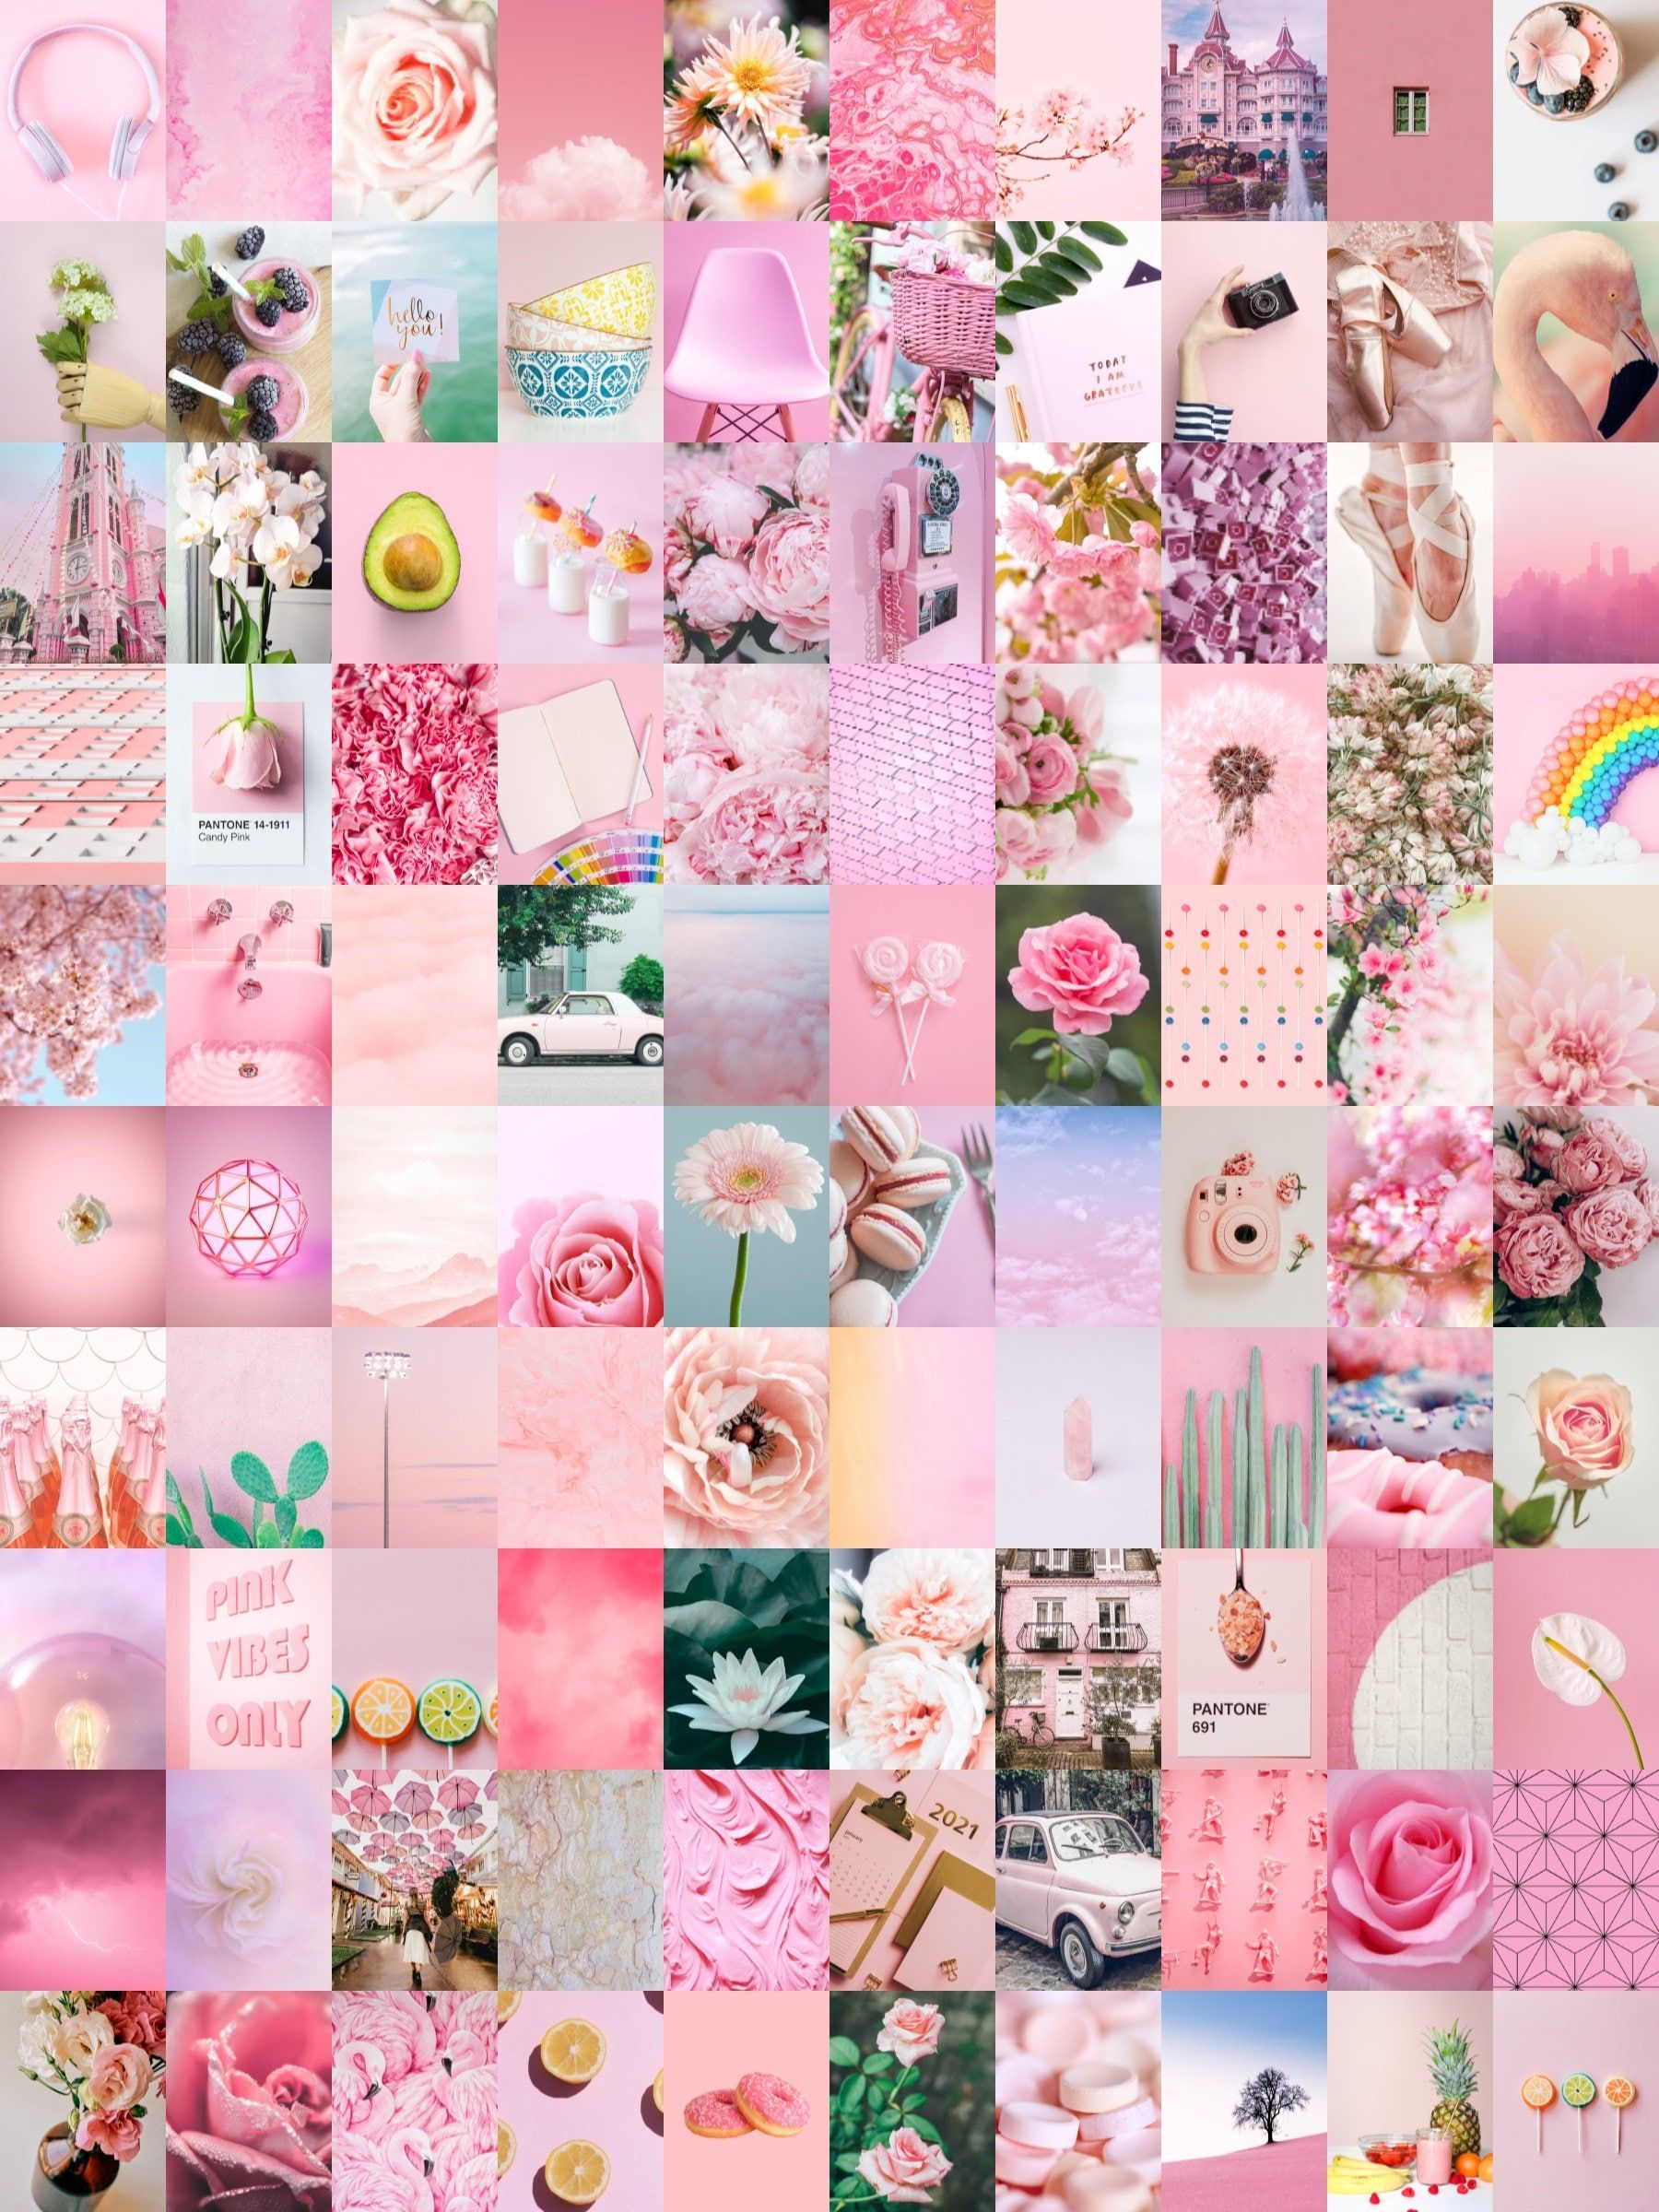 Aesthetic collage background of pink photos - Light pink, soft pink